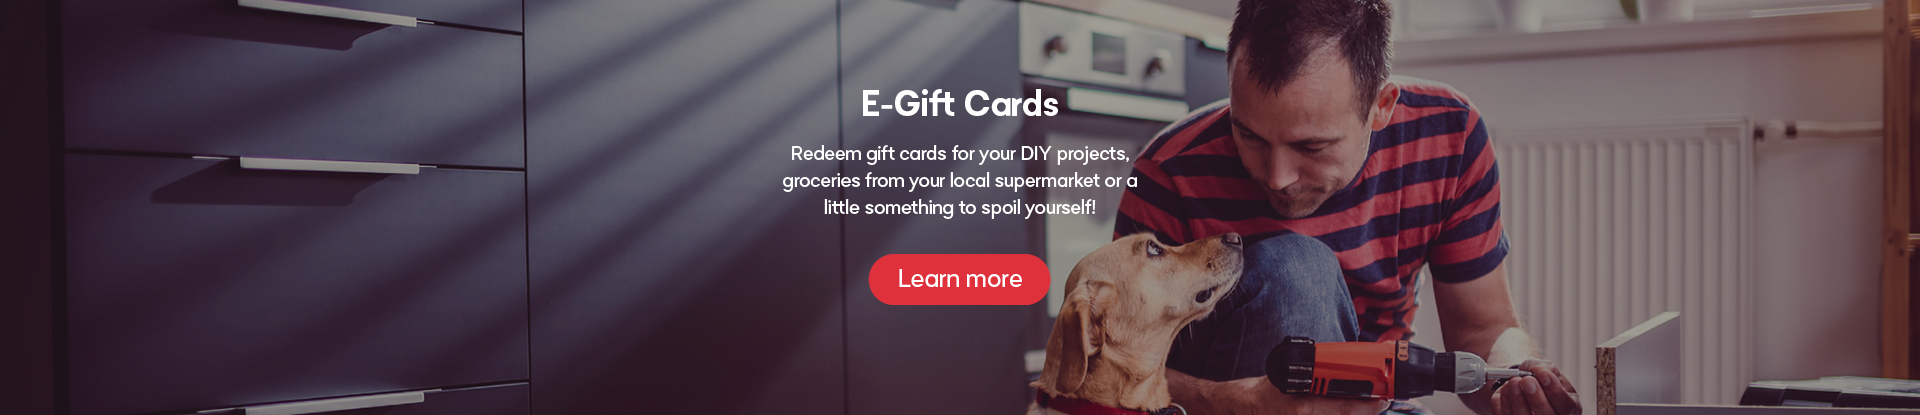 Redeem gift cards for your DIY projects